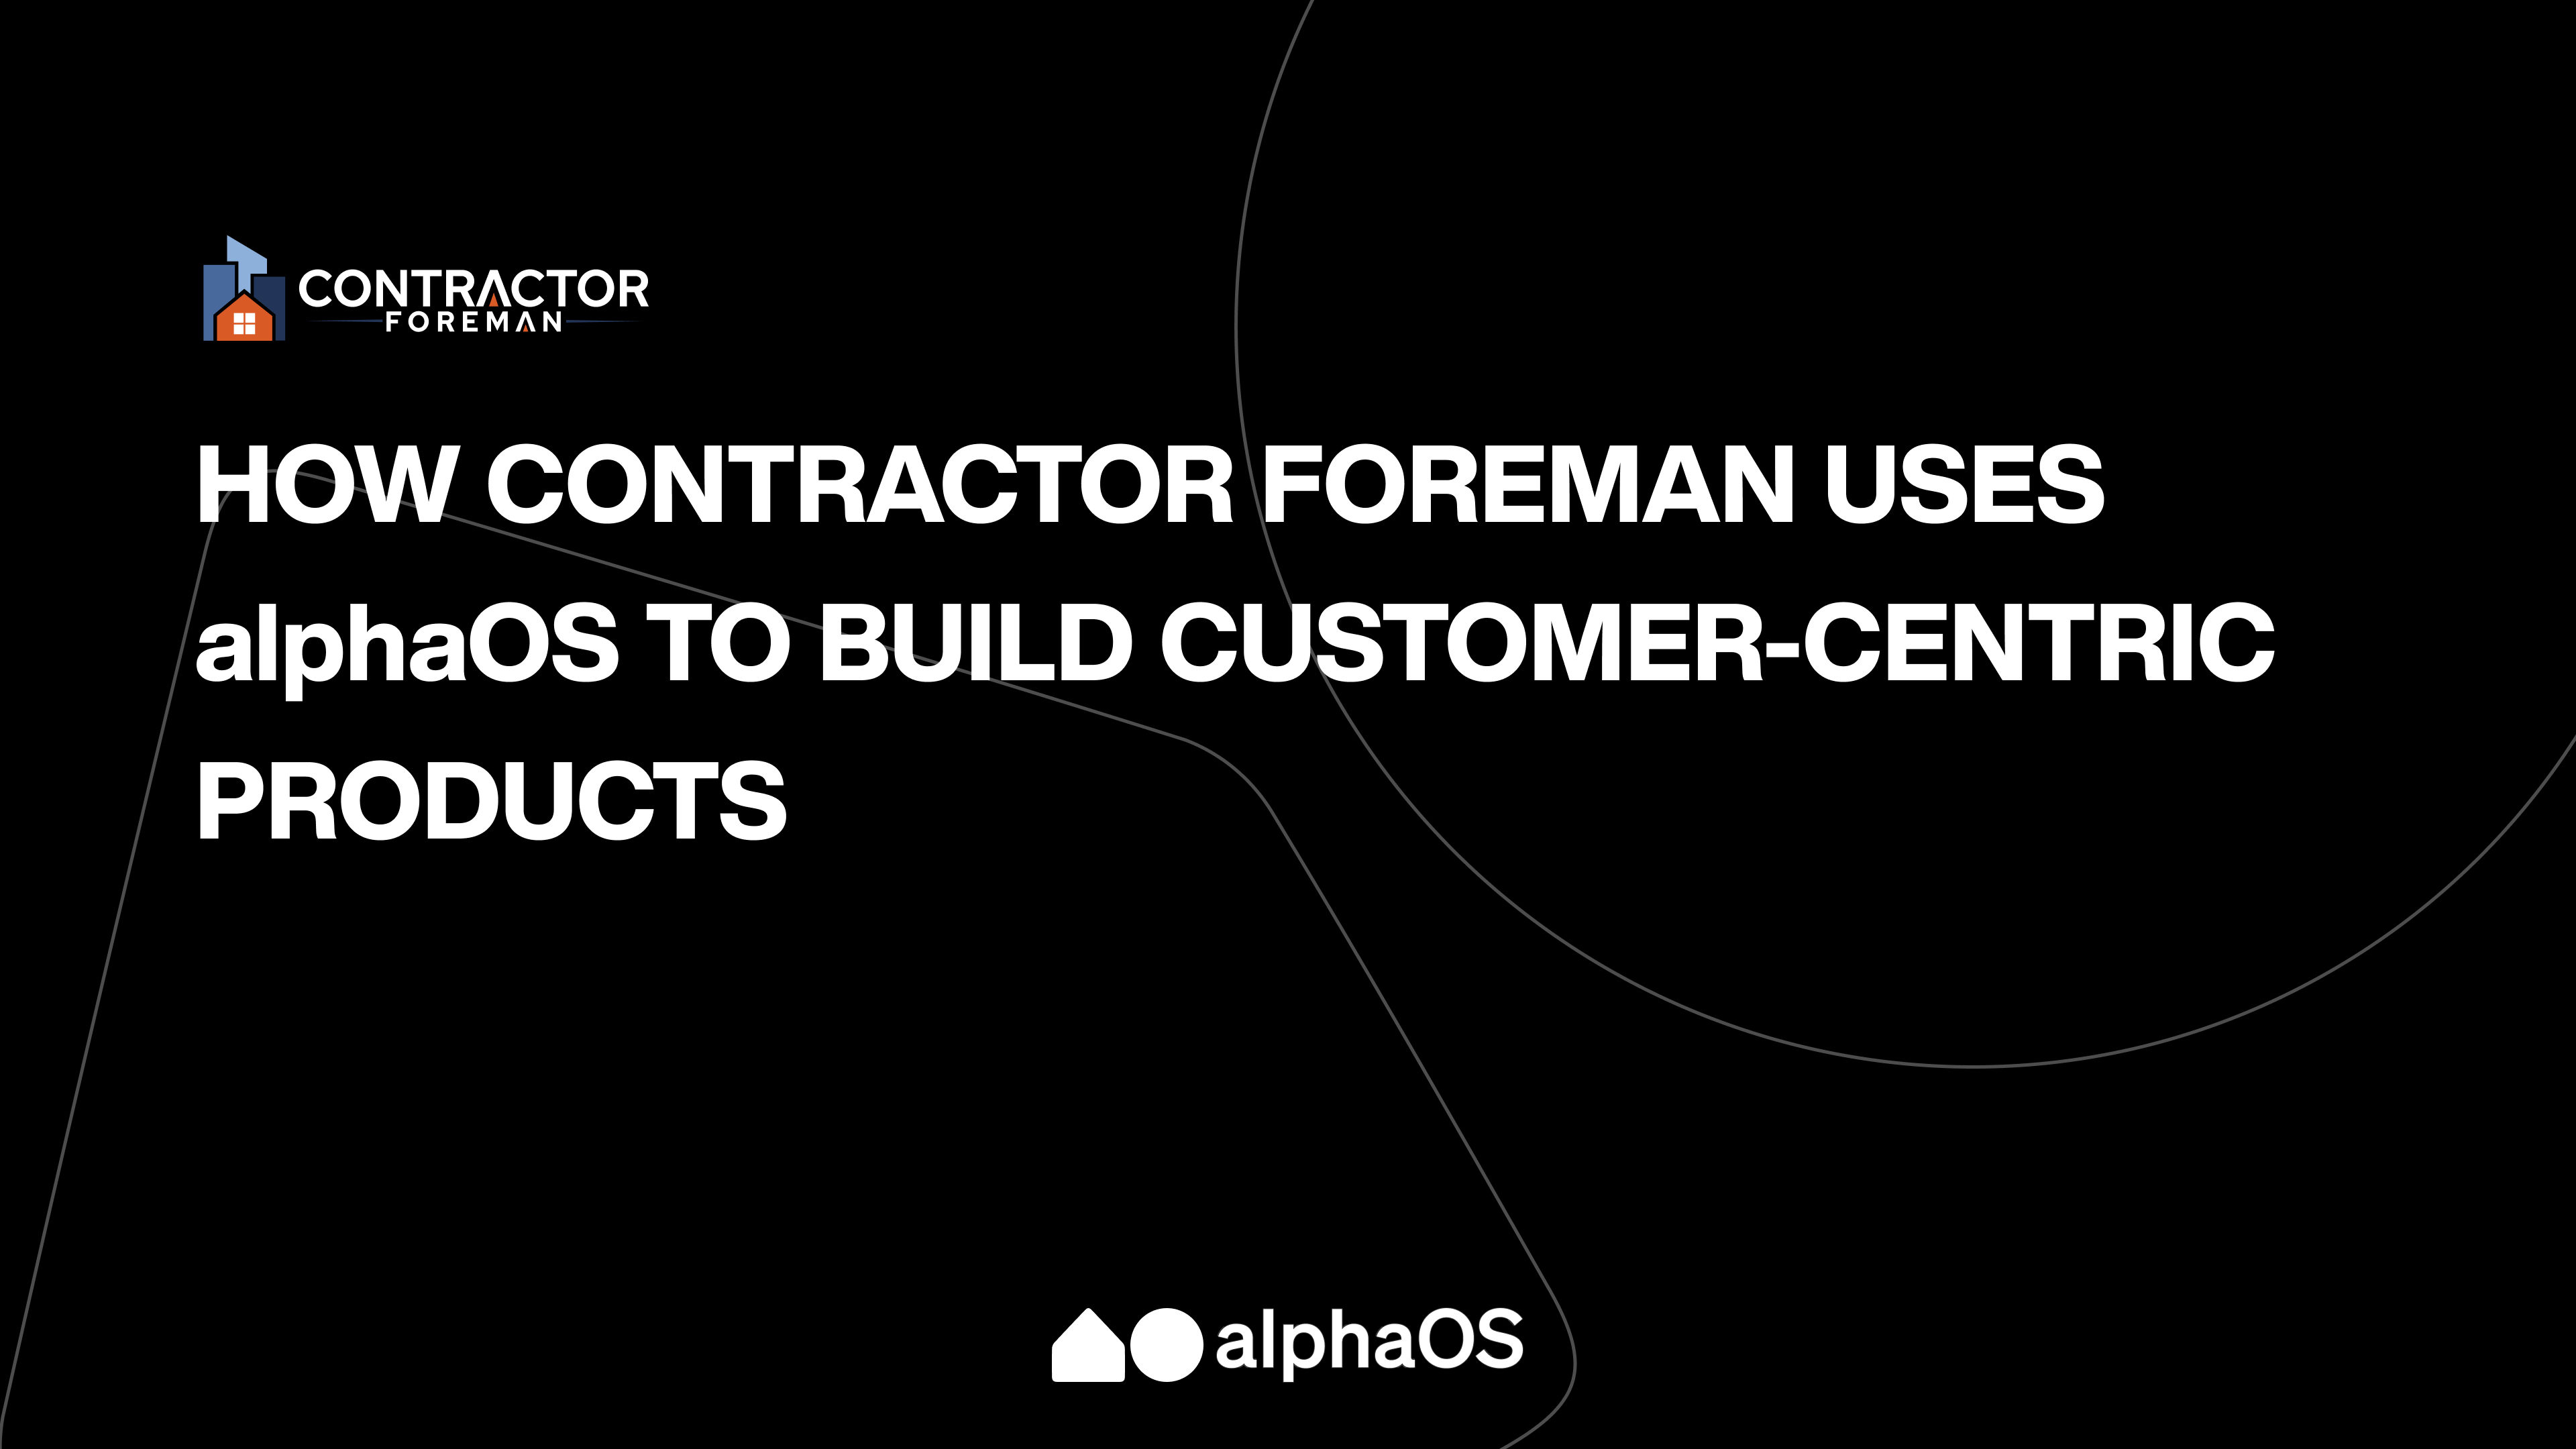 How Contractor Foreman uses alphaOS to build customer-centric products